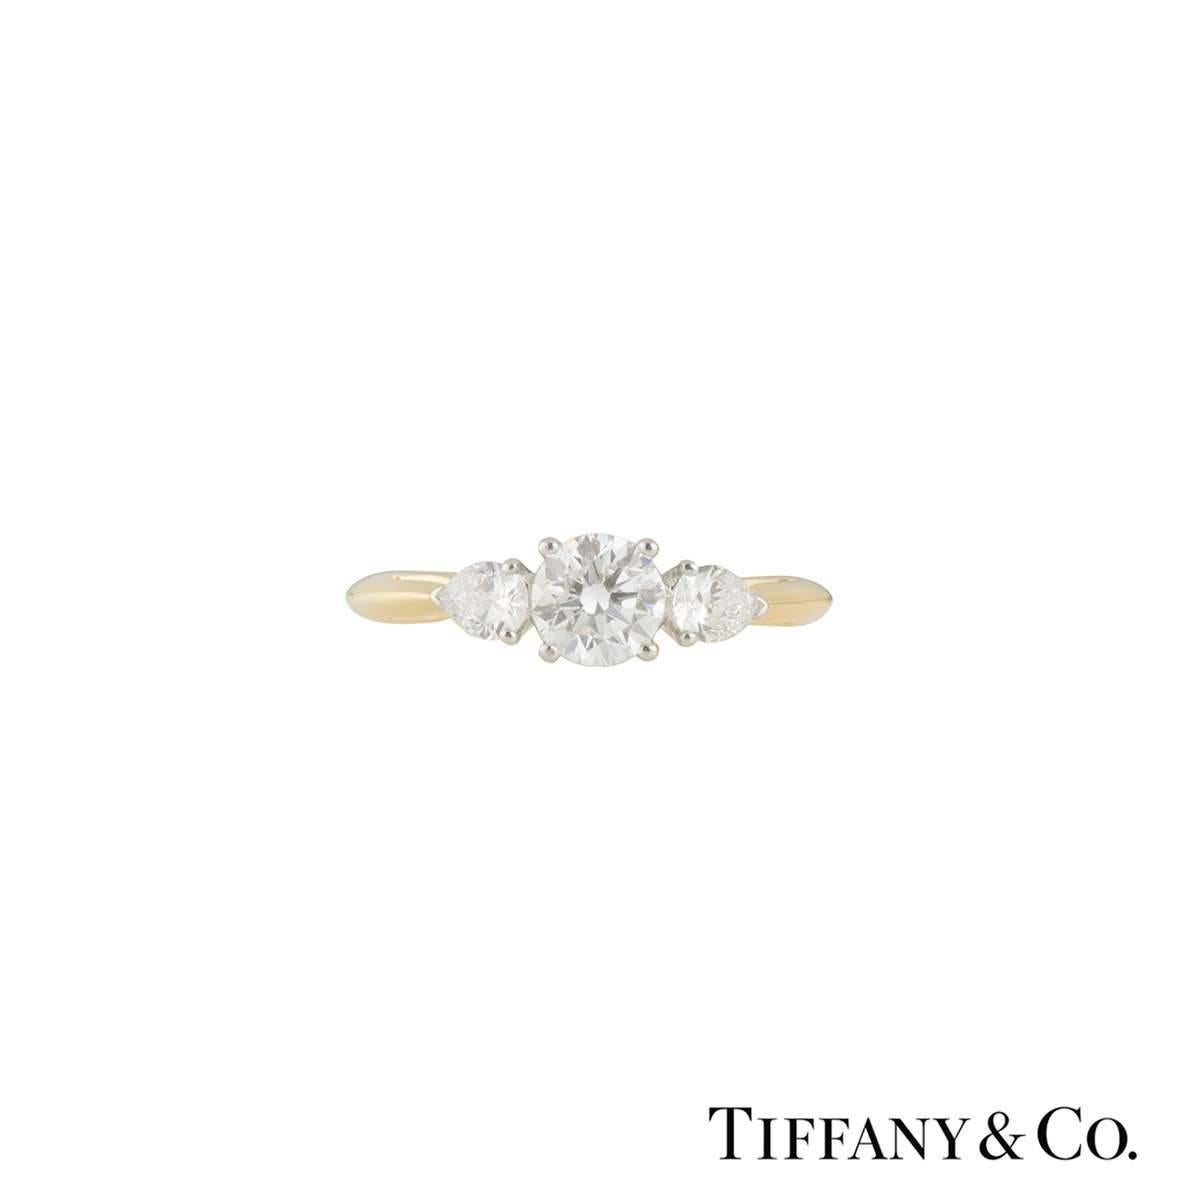 A beautiful 18k yellow gold Tiffany & Co. diamond ring from the Three Stone collection. The ring comprises of a round brilliant cut diamond in a 4 claw platinum setting with a total weight of 0.93ct, G colour and VS clarity. Complimenting the centre